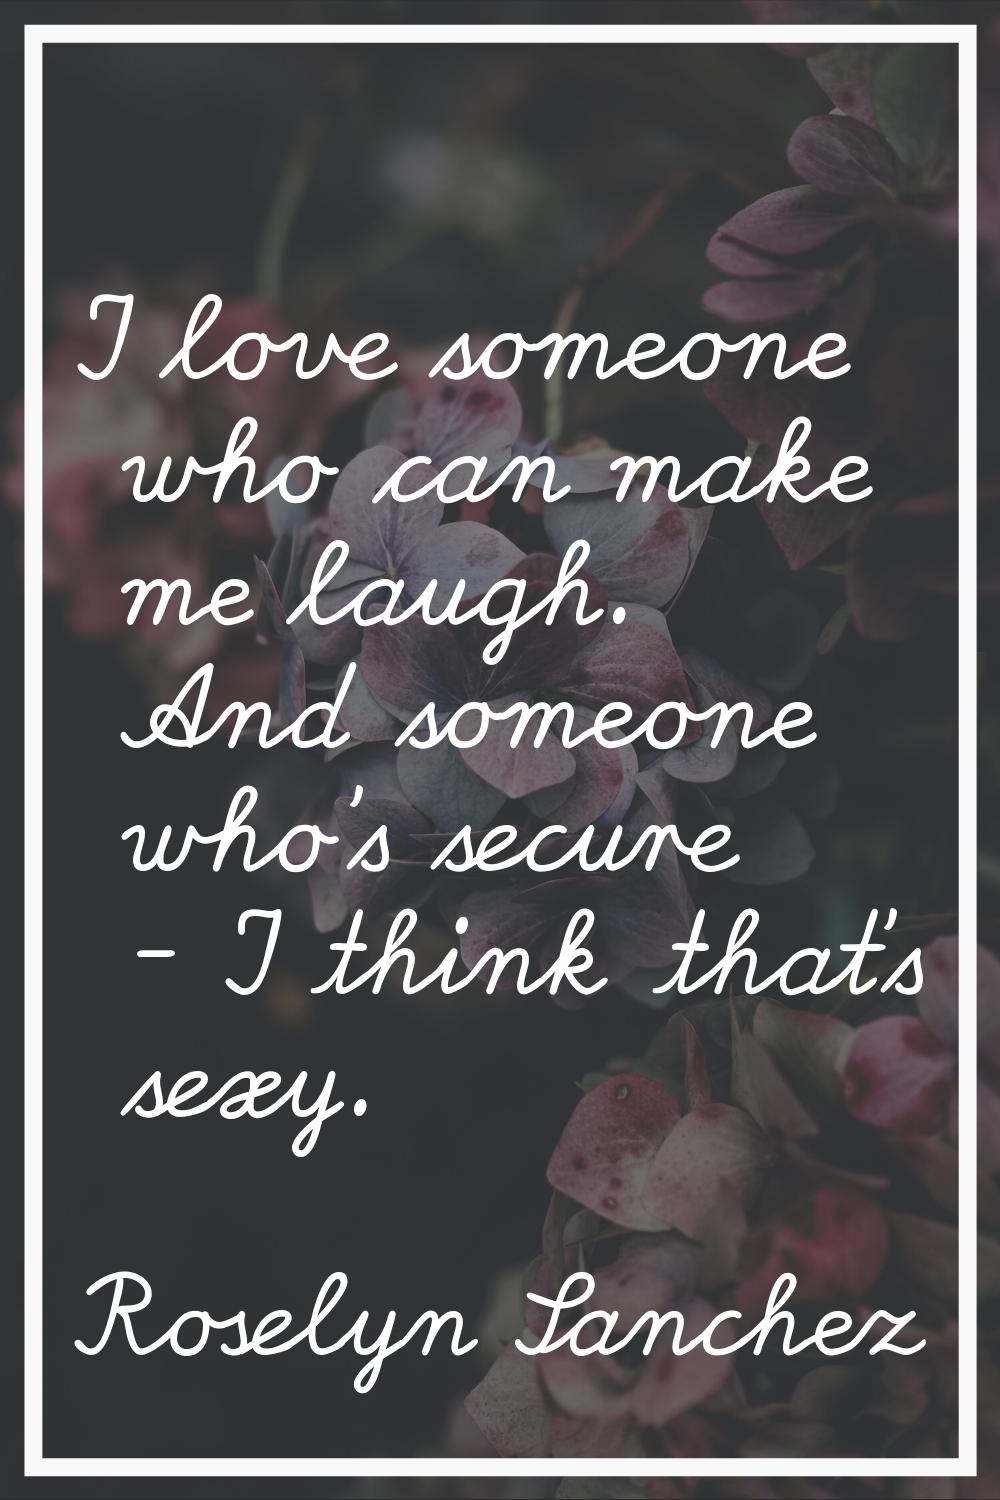 I love someone who can make me laugh. And someone who's secure - I think that's sexy.